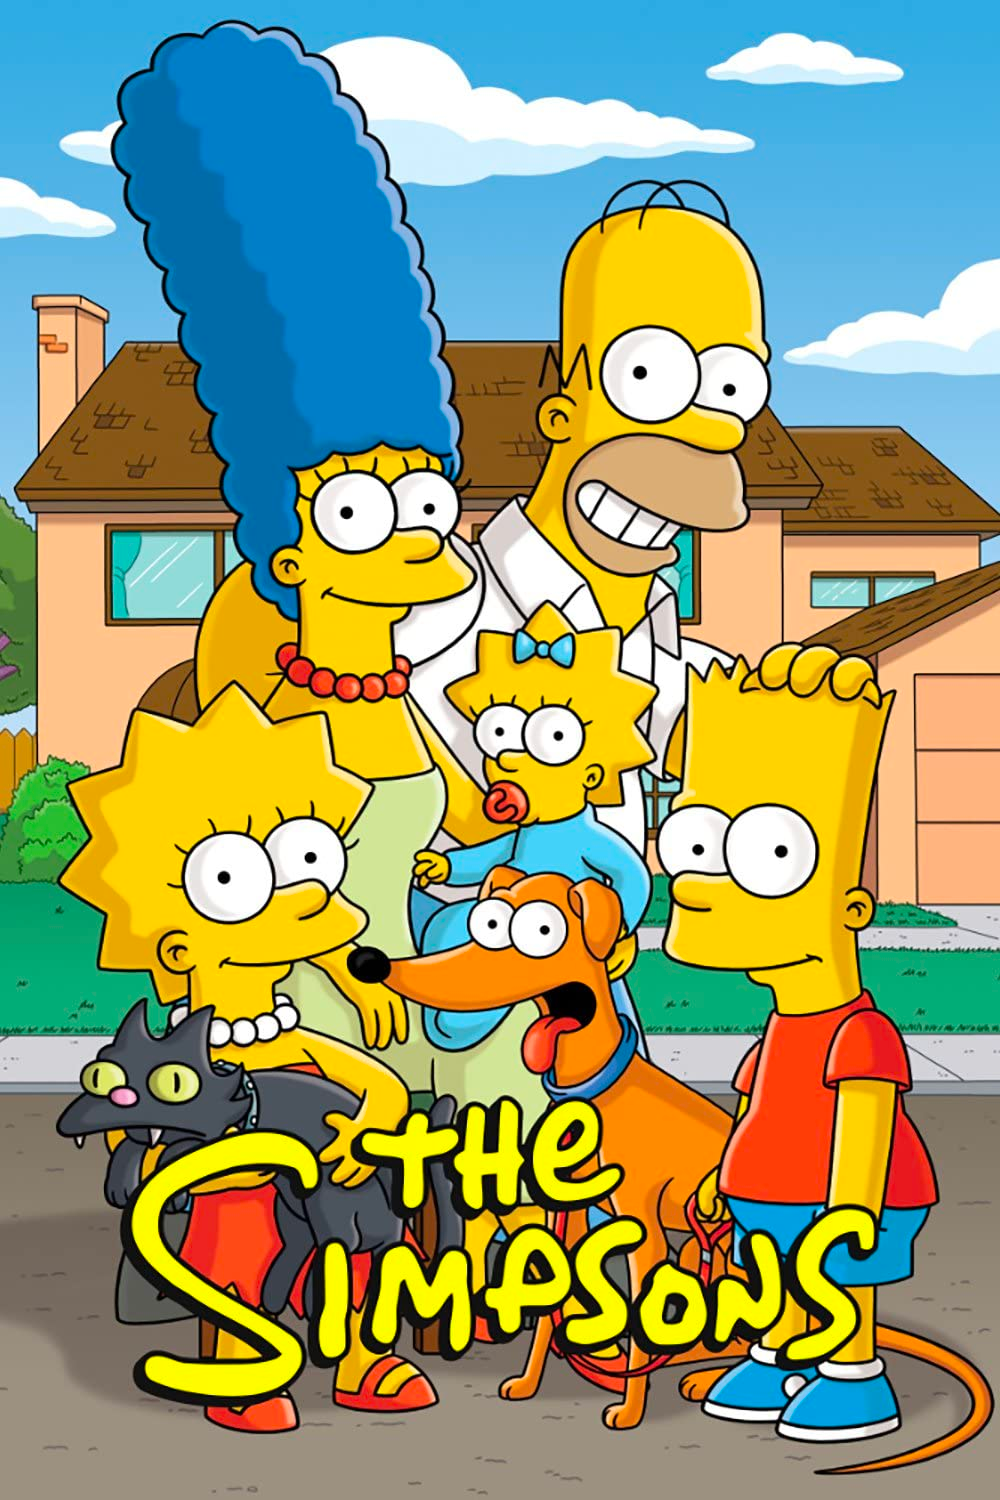 Best Sitcoms Of All Time: The Simpsons